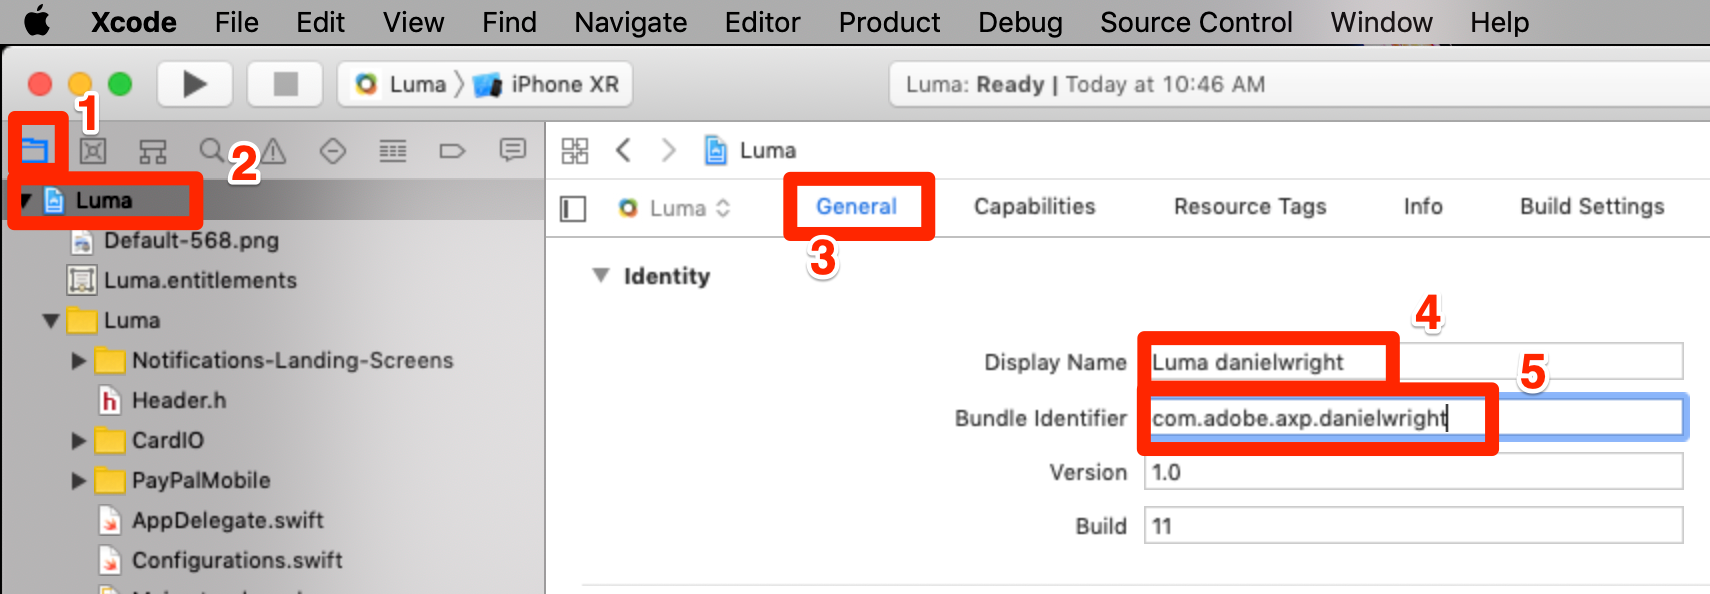 Update the General settings in XCode